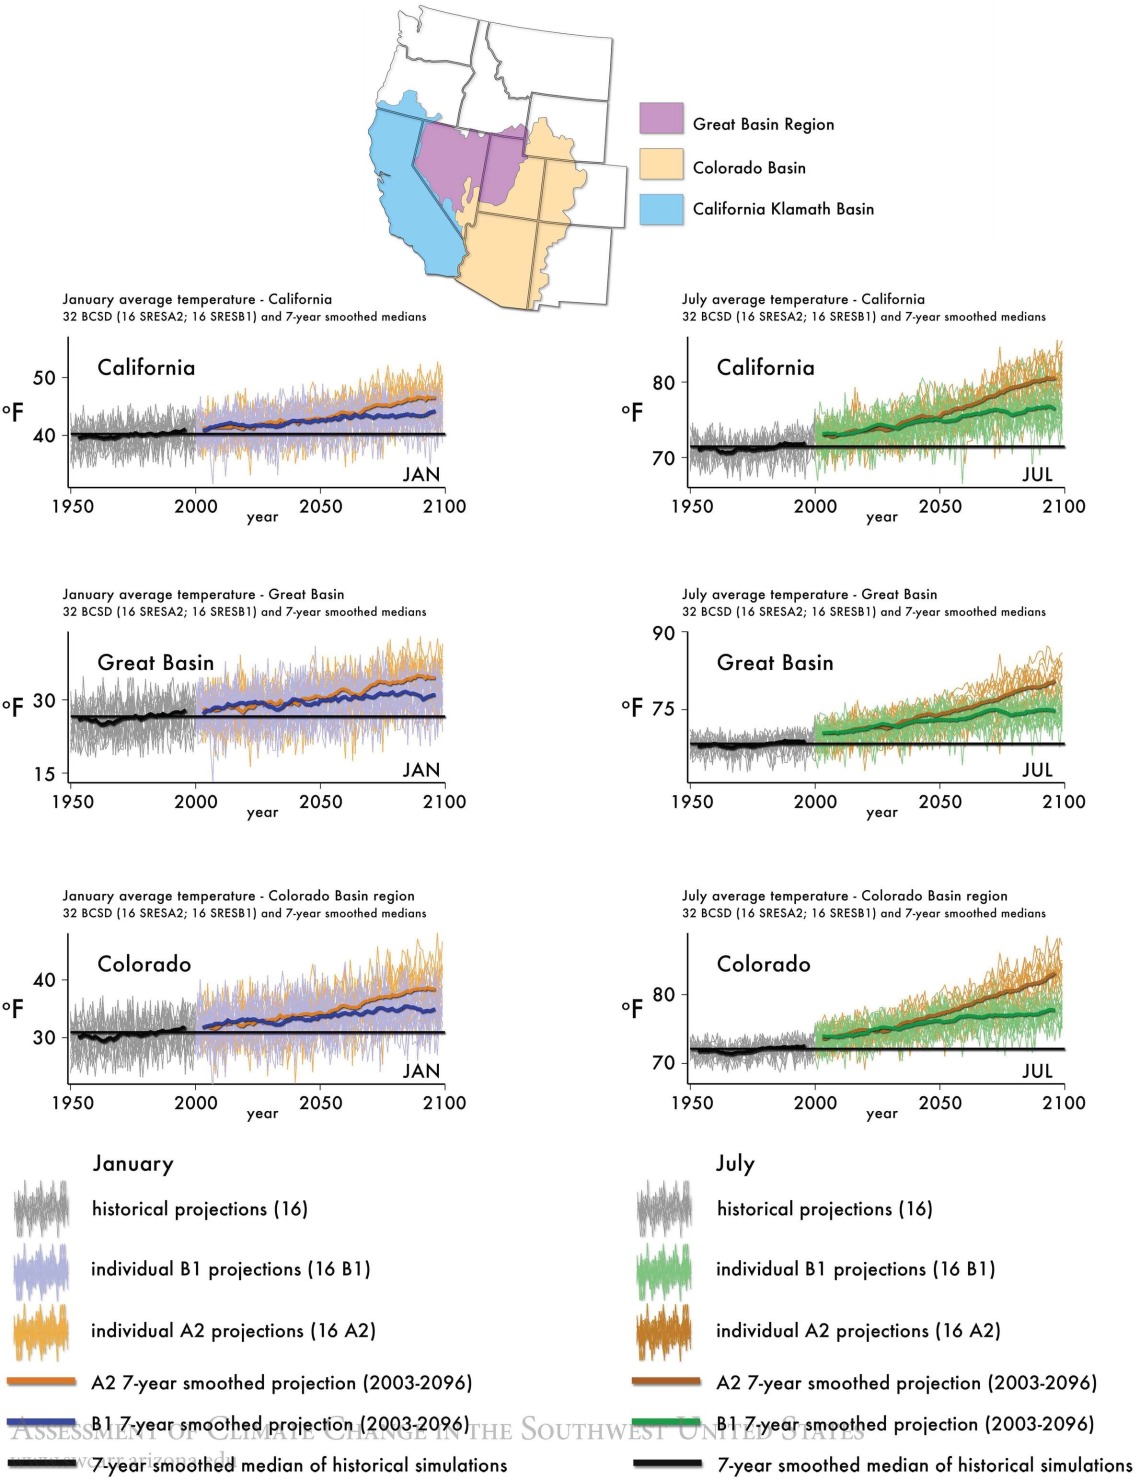 Figure 4 from Chapter 6 of Climate Assessment Report.